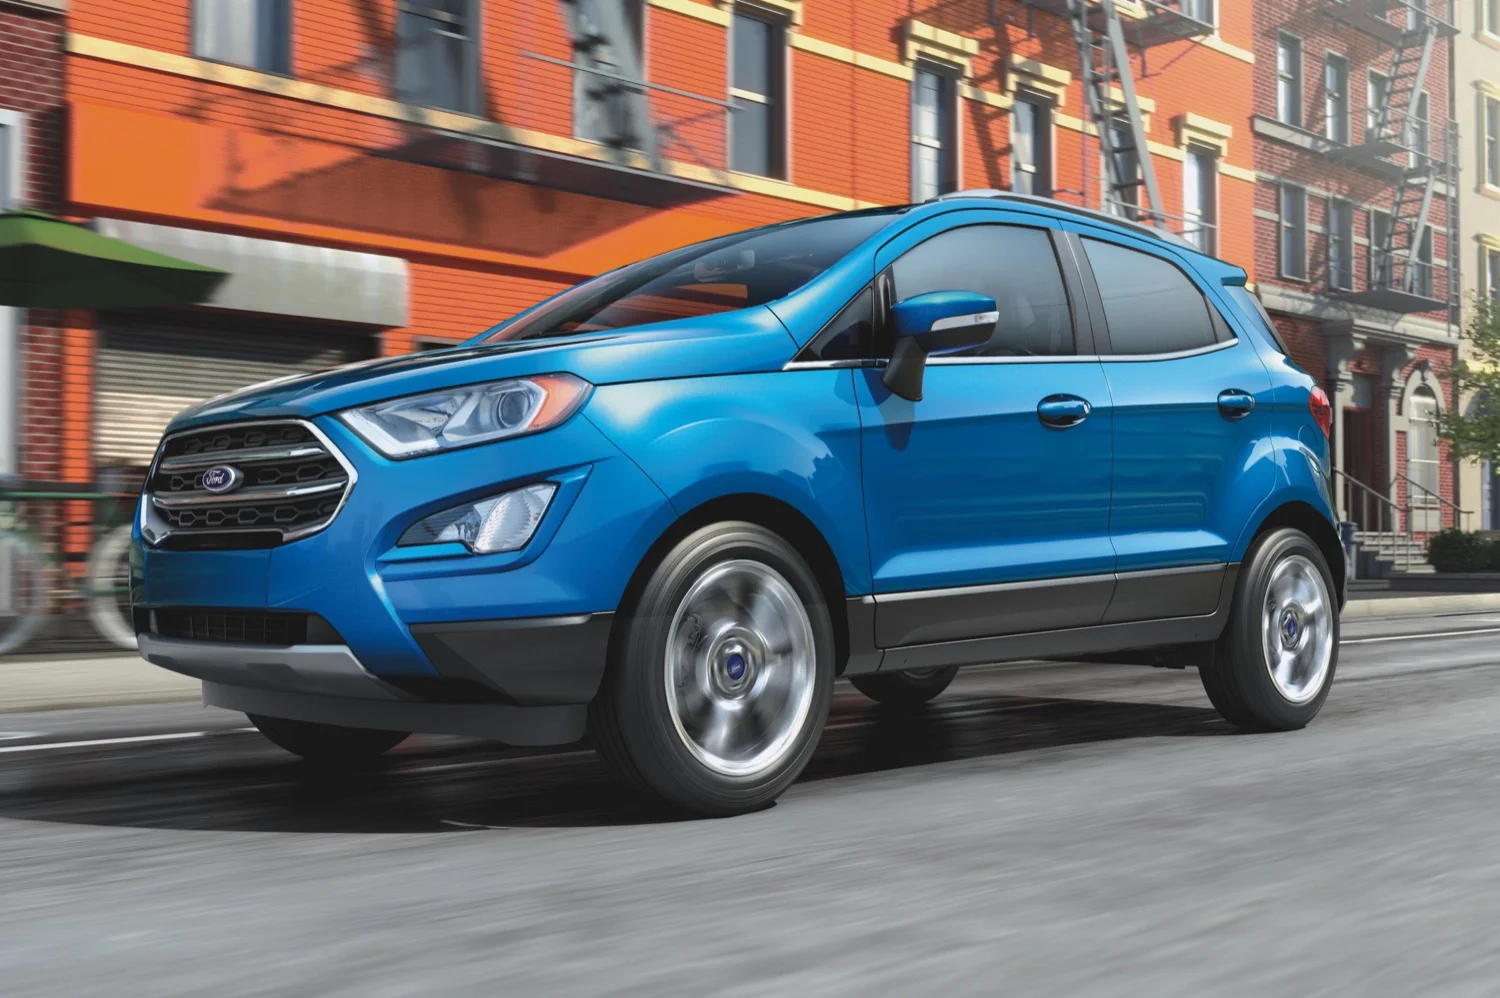 Ford EcoSport Engine Failures Being Investigated By NHTSA